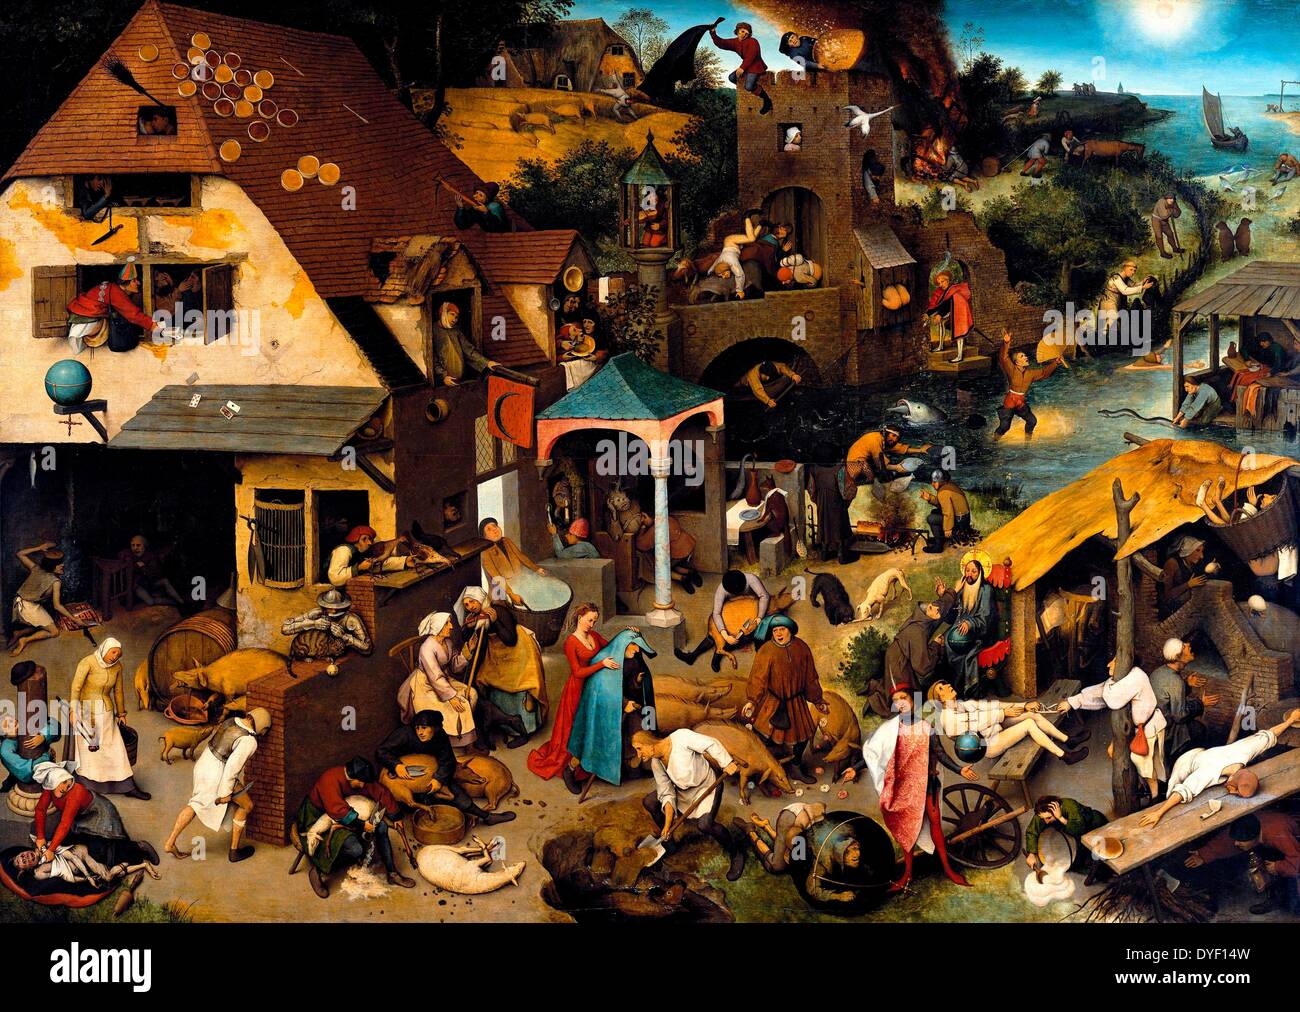 Netherlandish Proverbs is an oil-on-oak-panel painting by Pieter Bruegel the Elder which depicts a land populated with literal renditions of Dutch/Flemish proverbs of the day. From 1559. Stock Photo